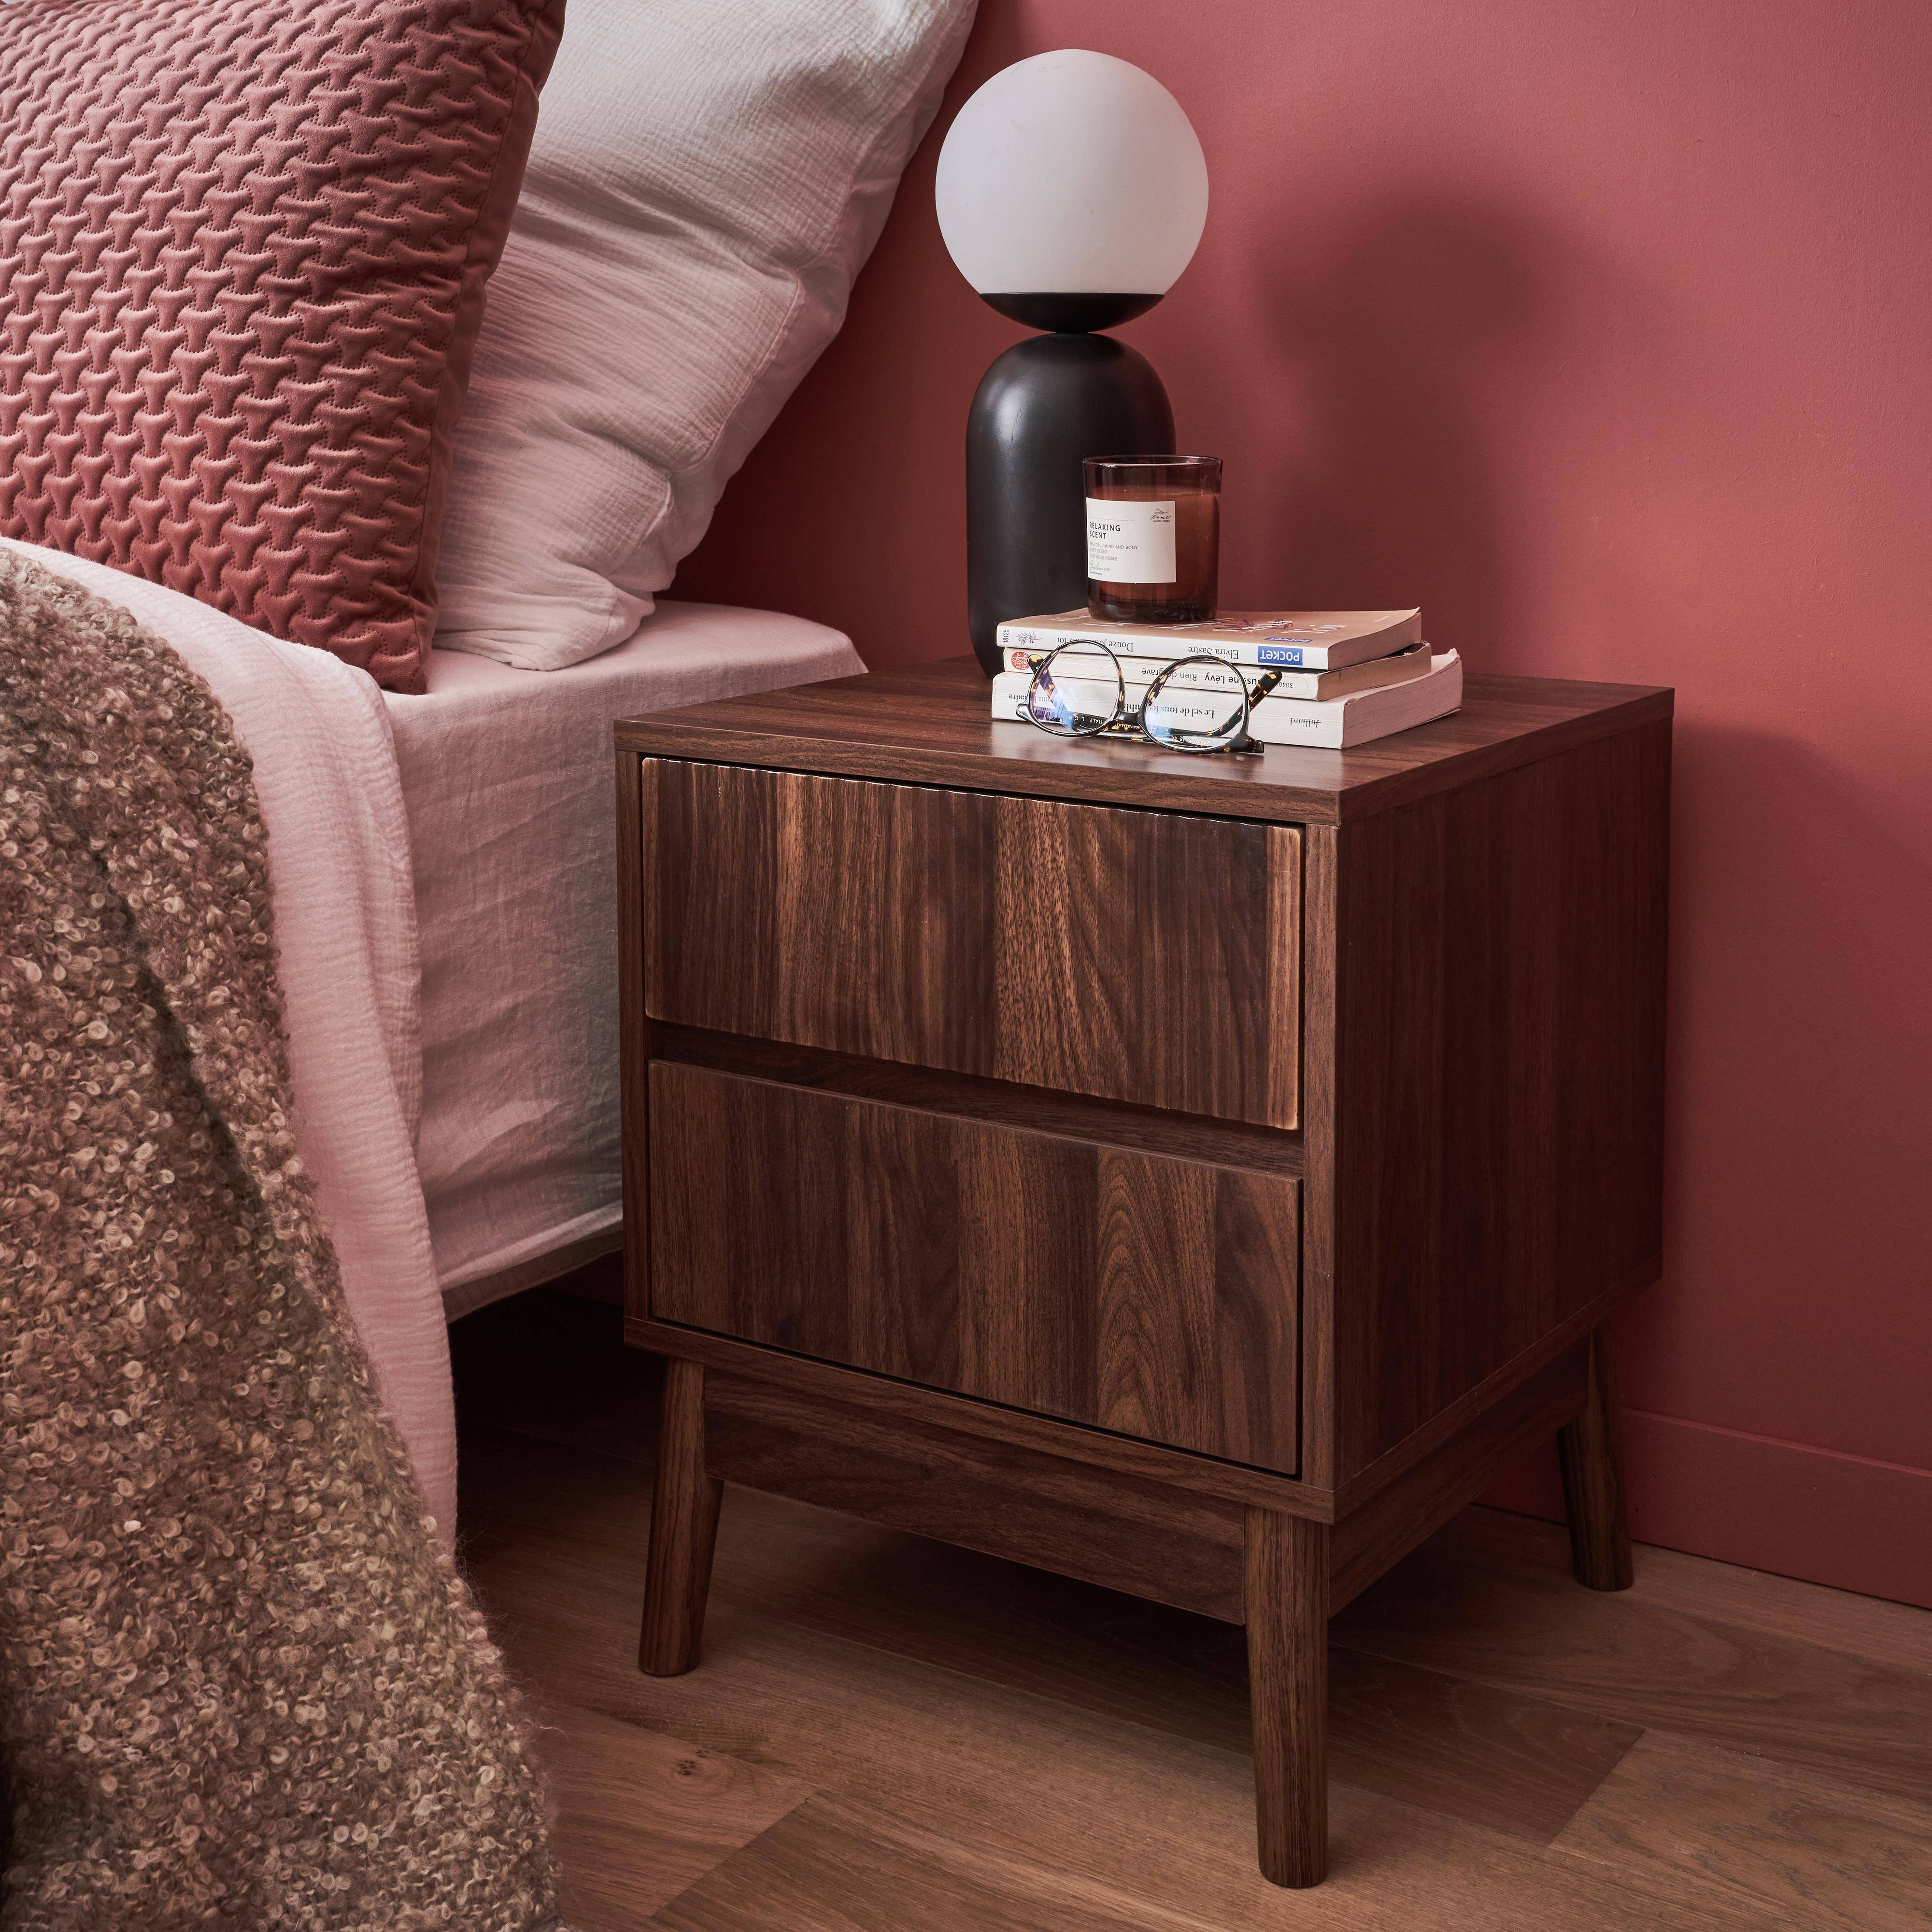 Pair of grooved wooden bedside tables with 2 drawers, 40x39x48cm - Linear - Dark Wood colour Photo2